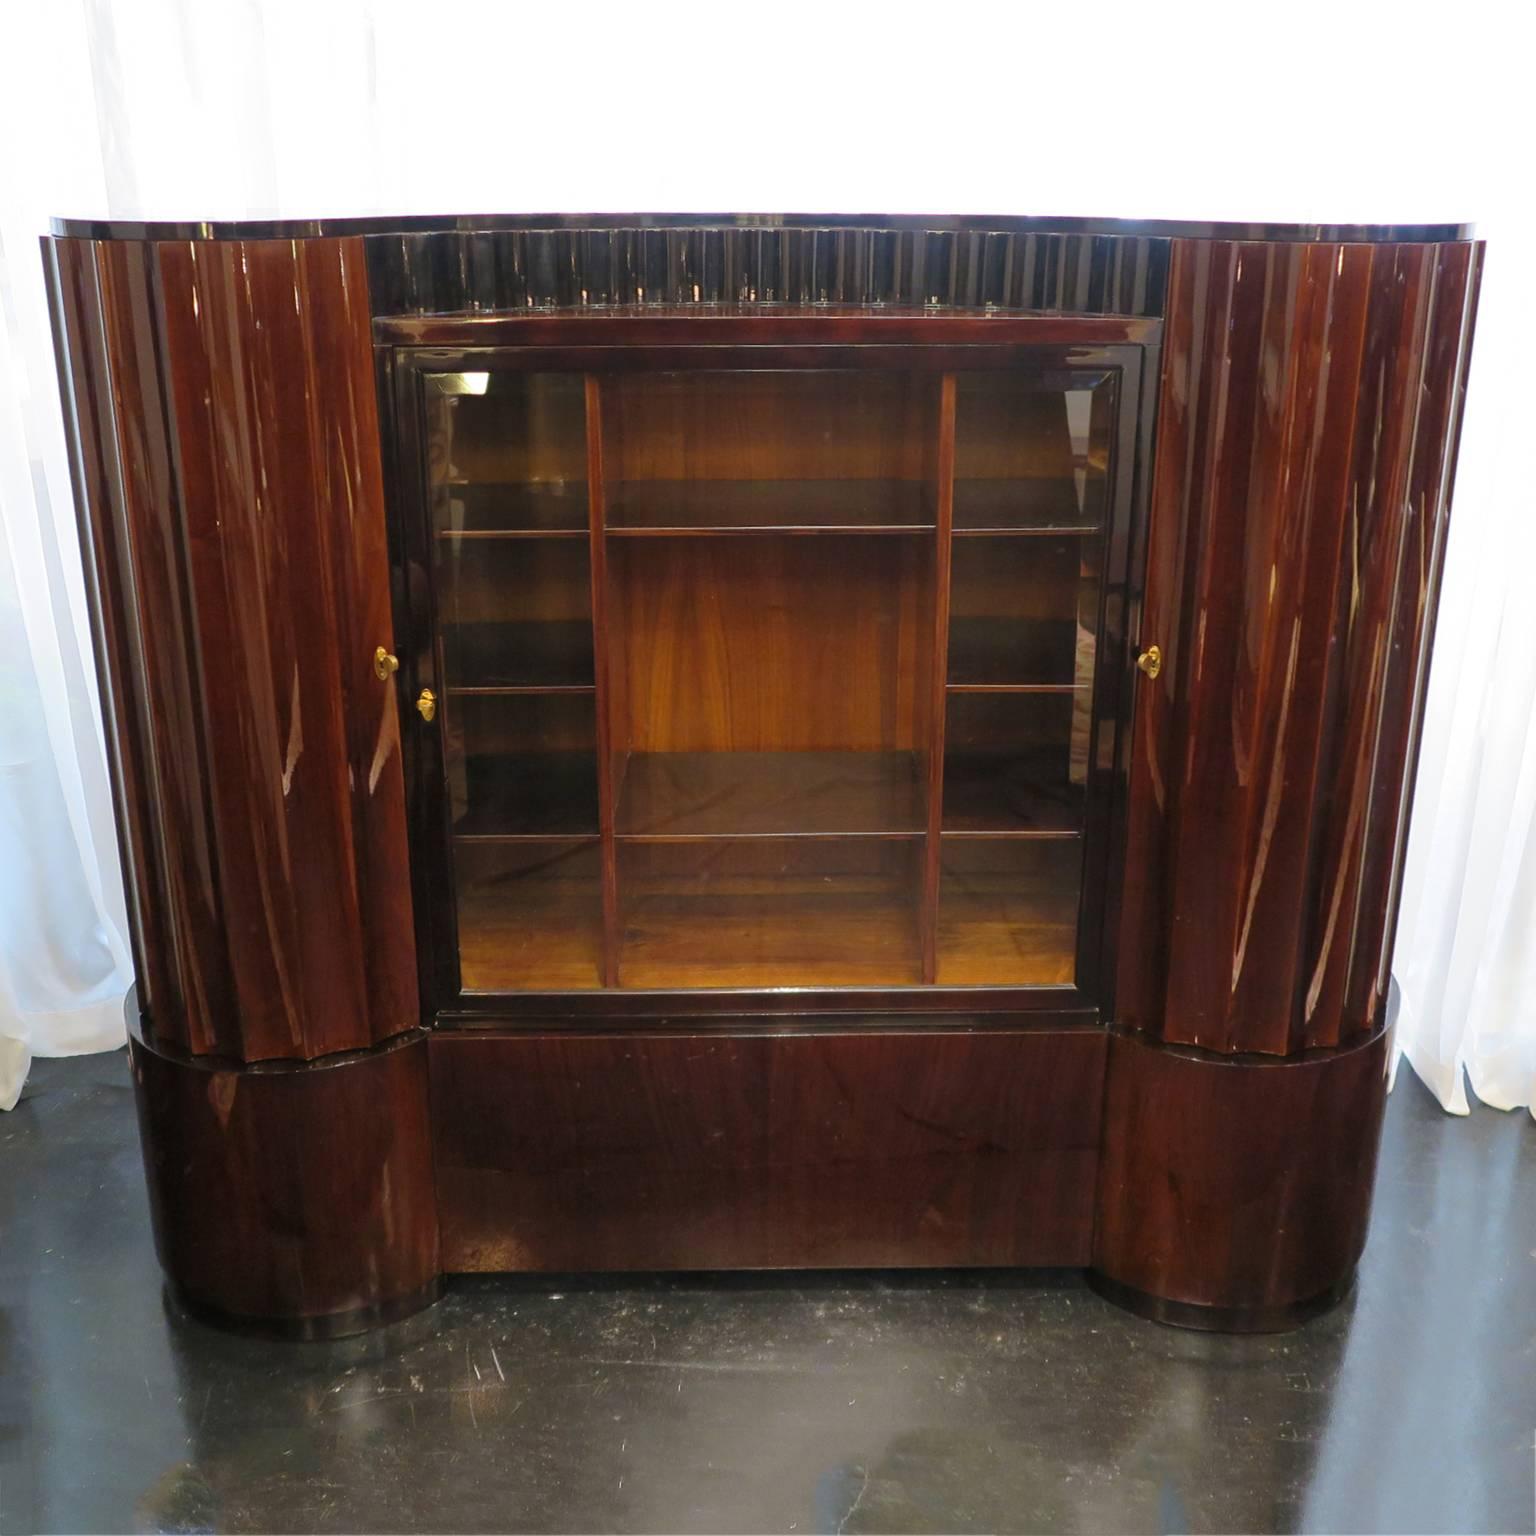 Lacquered palisander armoire by famed maker Francisque Chaleyssin (1872-1951). This impressive piece features rounded fluted doors with adjustable shelving inside and fluted details along the top of the frame. A stunning vitrine display occupies the